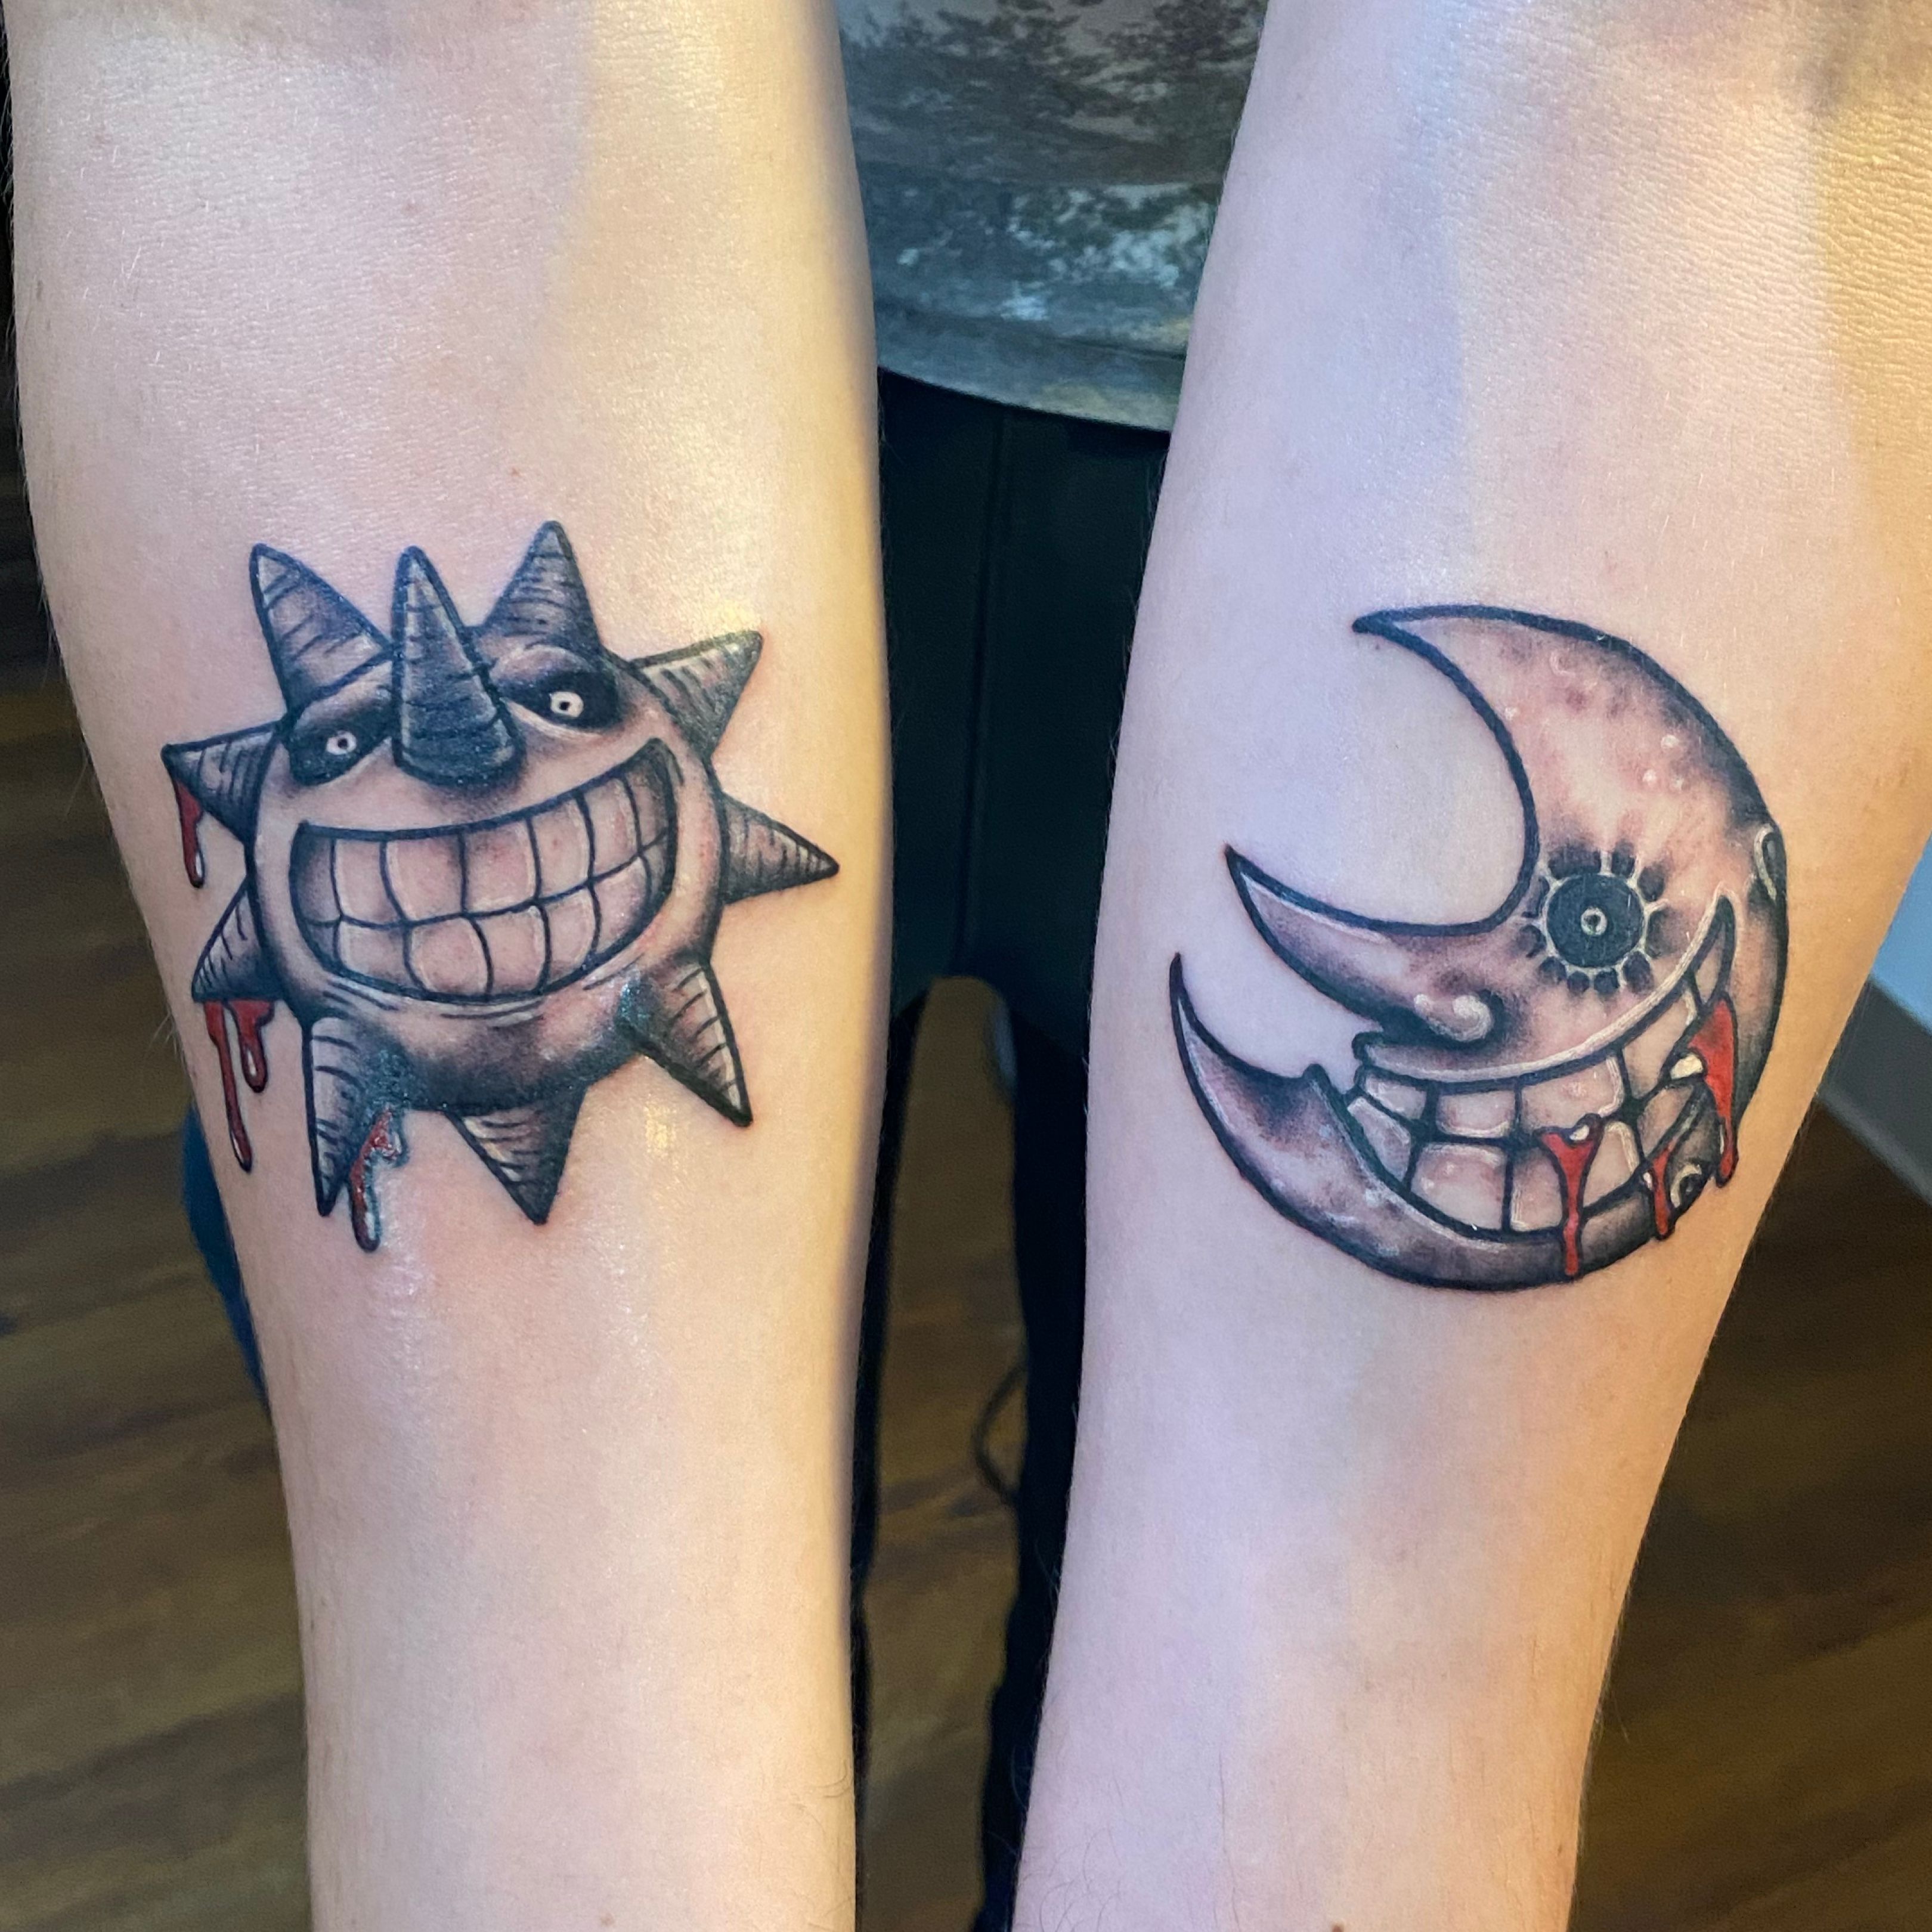 Nicole on Twitter Soul Eater tattoos from this week Im so happy with  these they were so much fun  httpstco8iprtRqyiV  Twitter